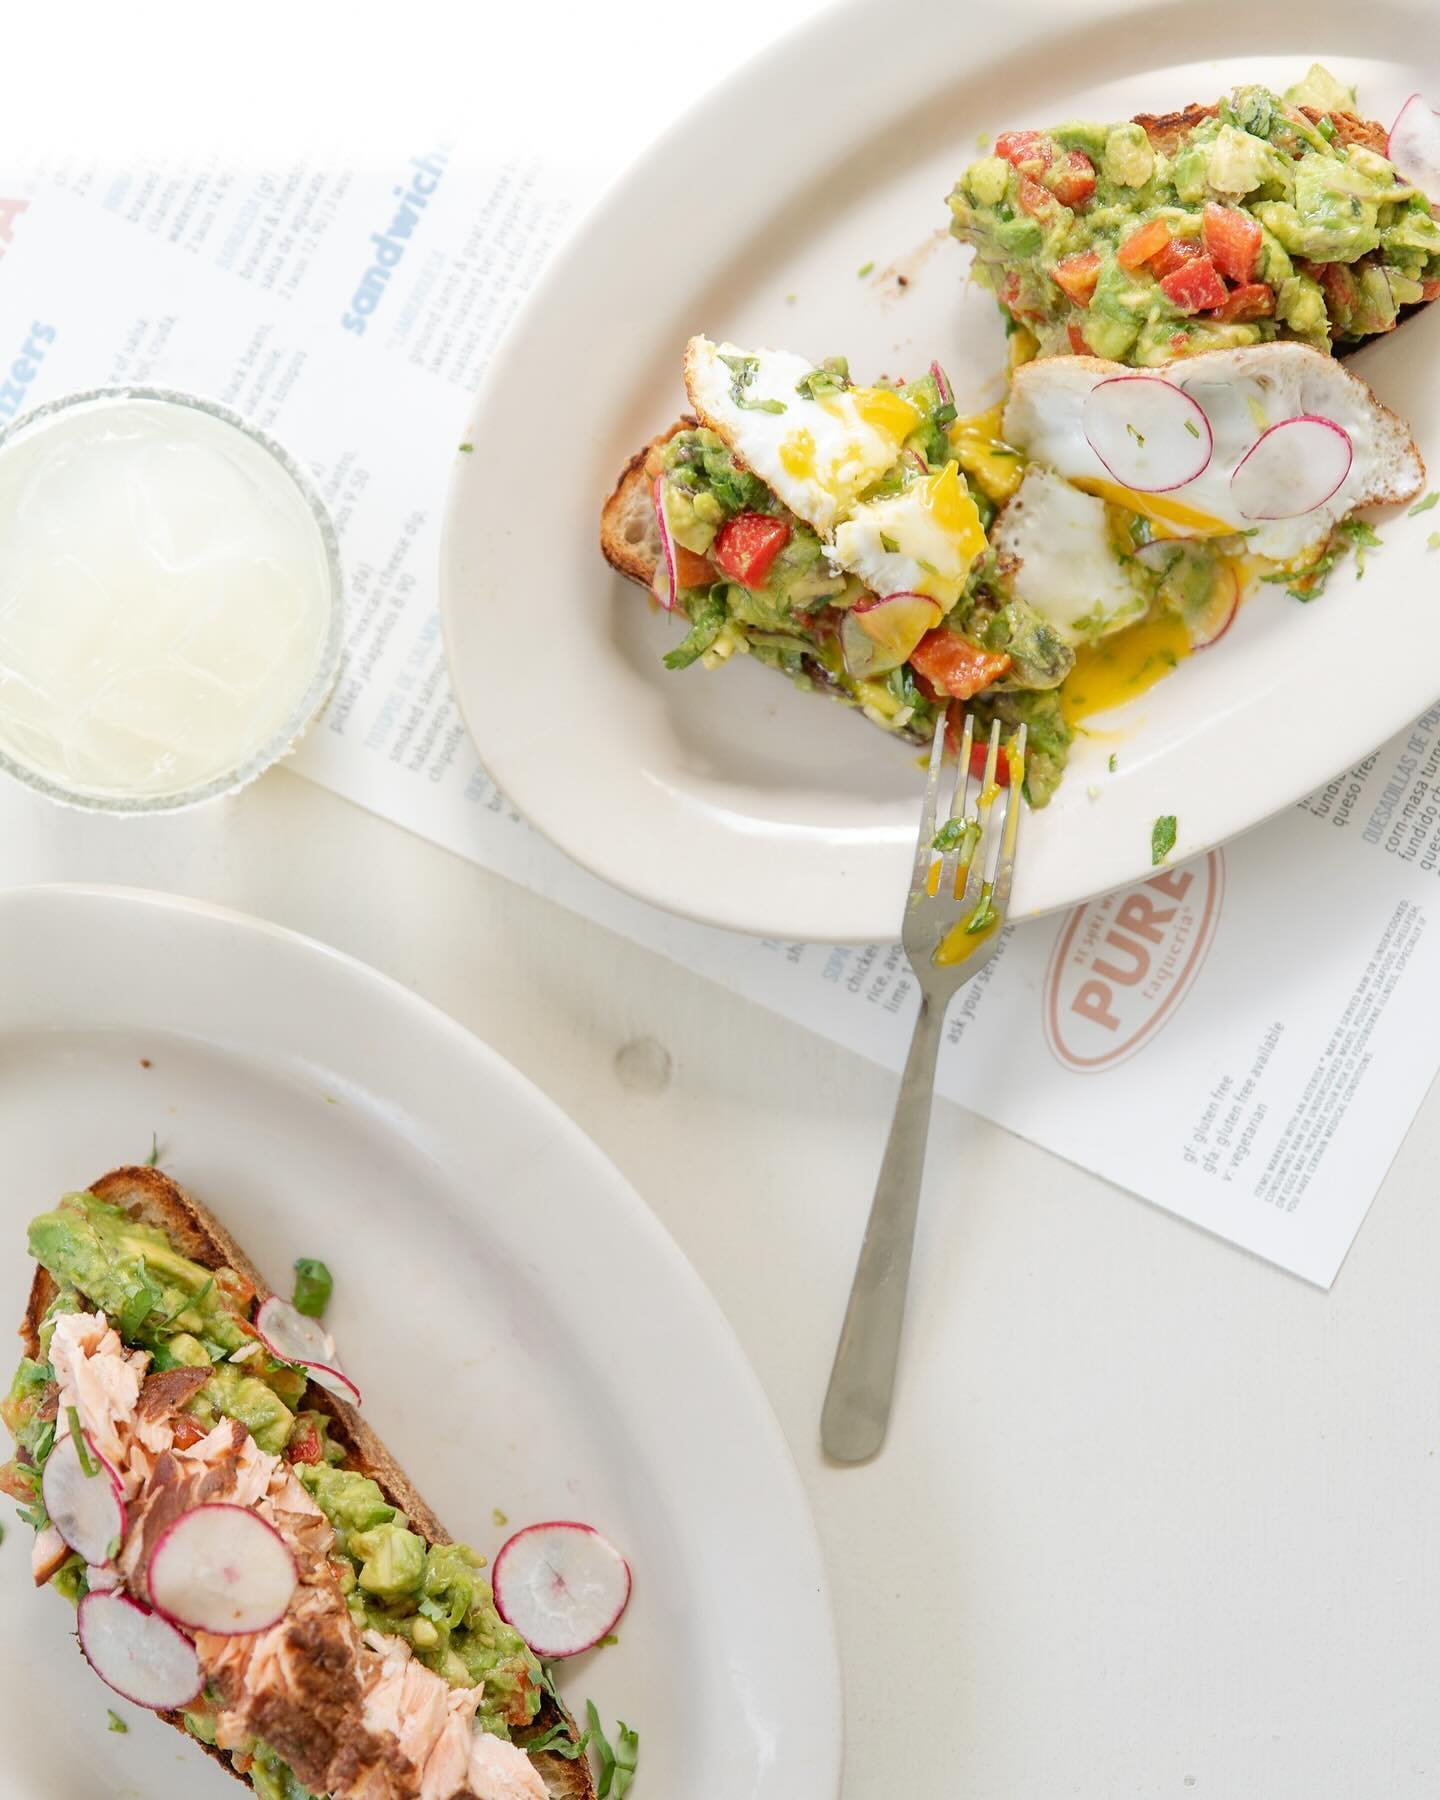 Exciting news! Did you know we added avocado toast to our brunch menu? Available on Saturdays 11-4 and Sundays all day. 

PAN TOSTADO CON AGUACATE
Tbb rosemary lemon sourdough toast, avocado, onions, roasted red pepper, cilantro, radish
Add fried egg